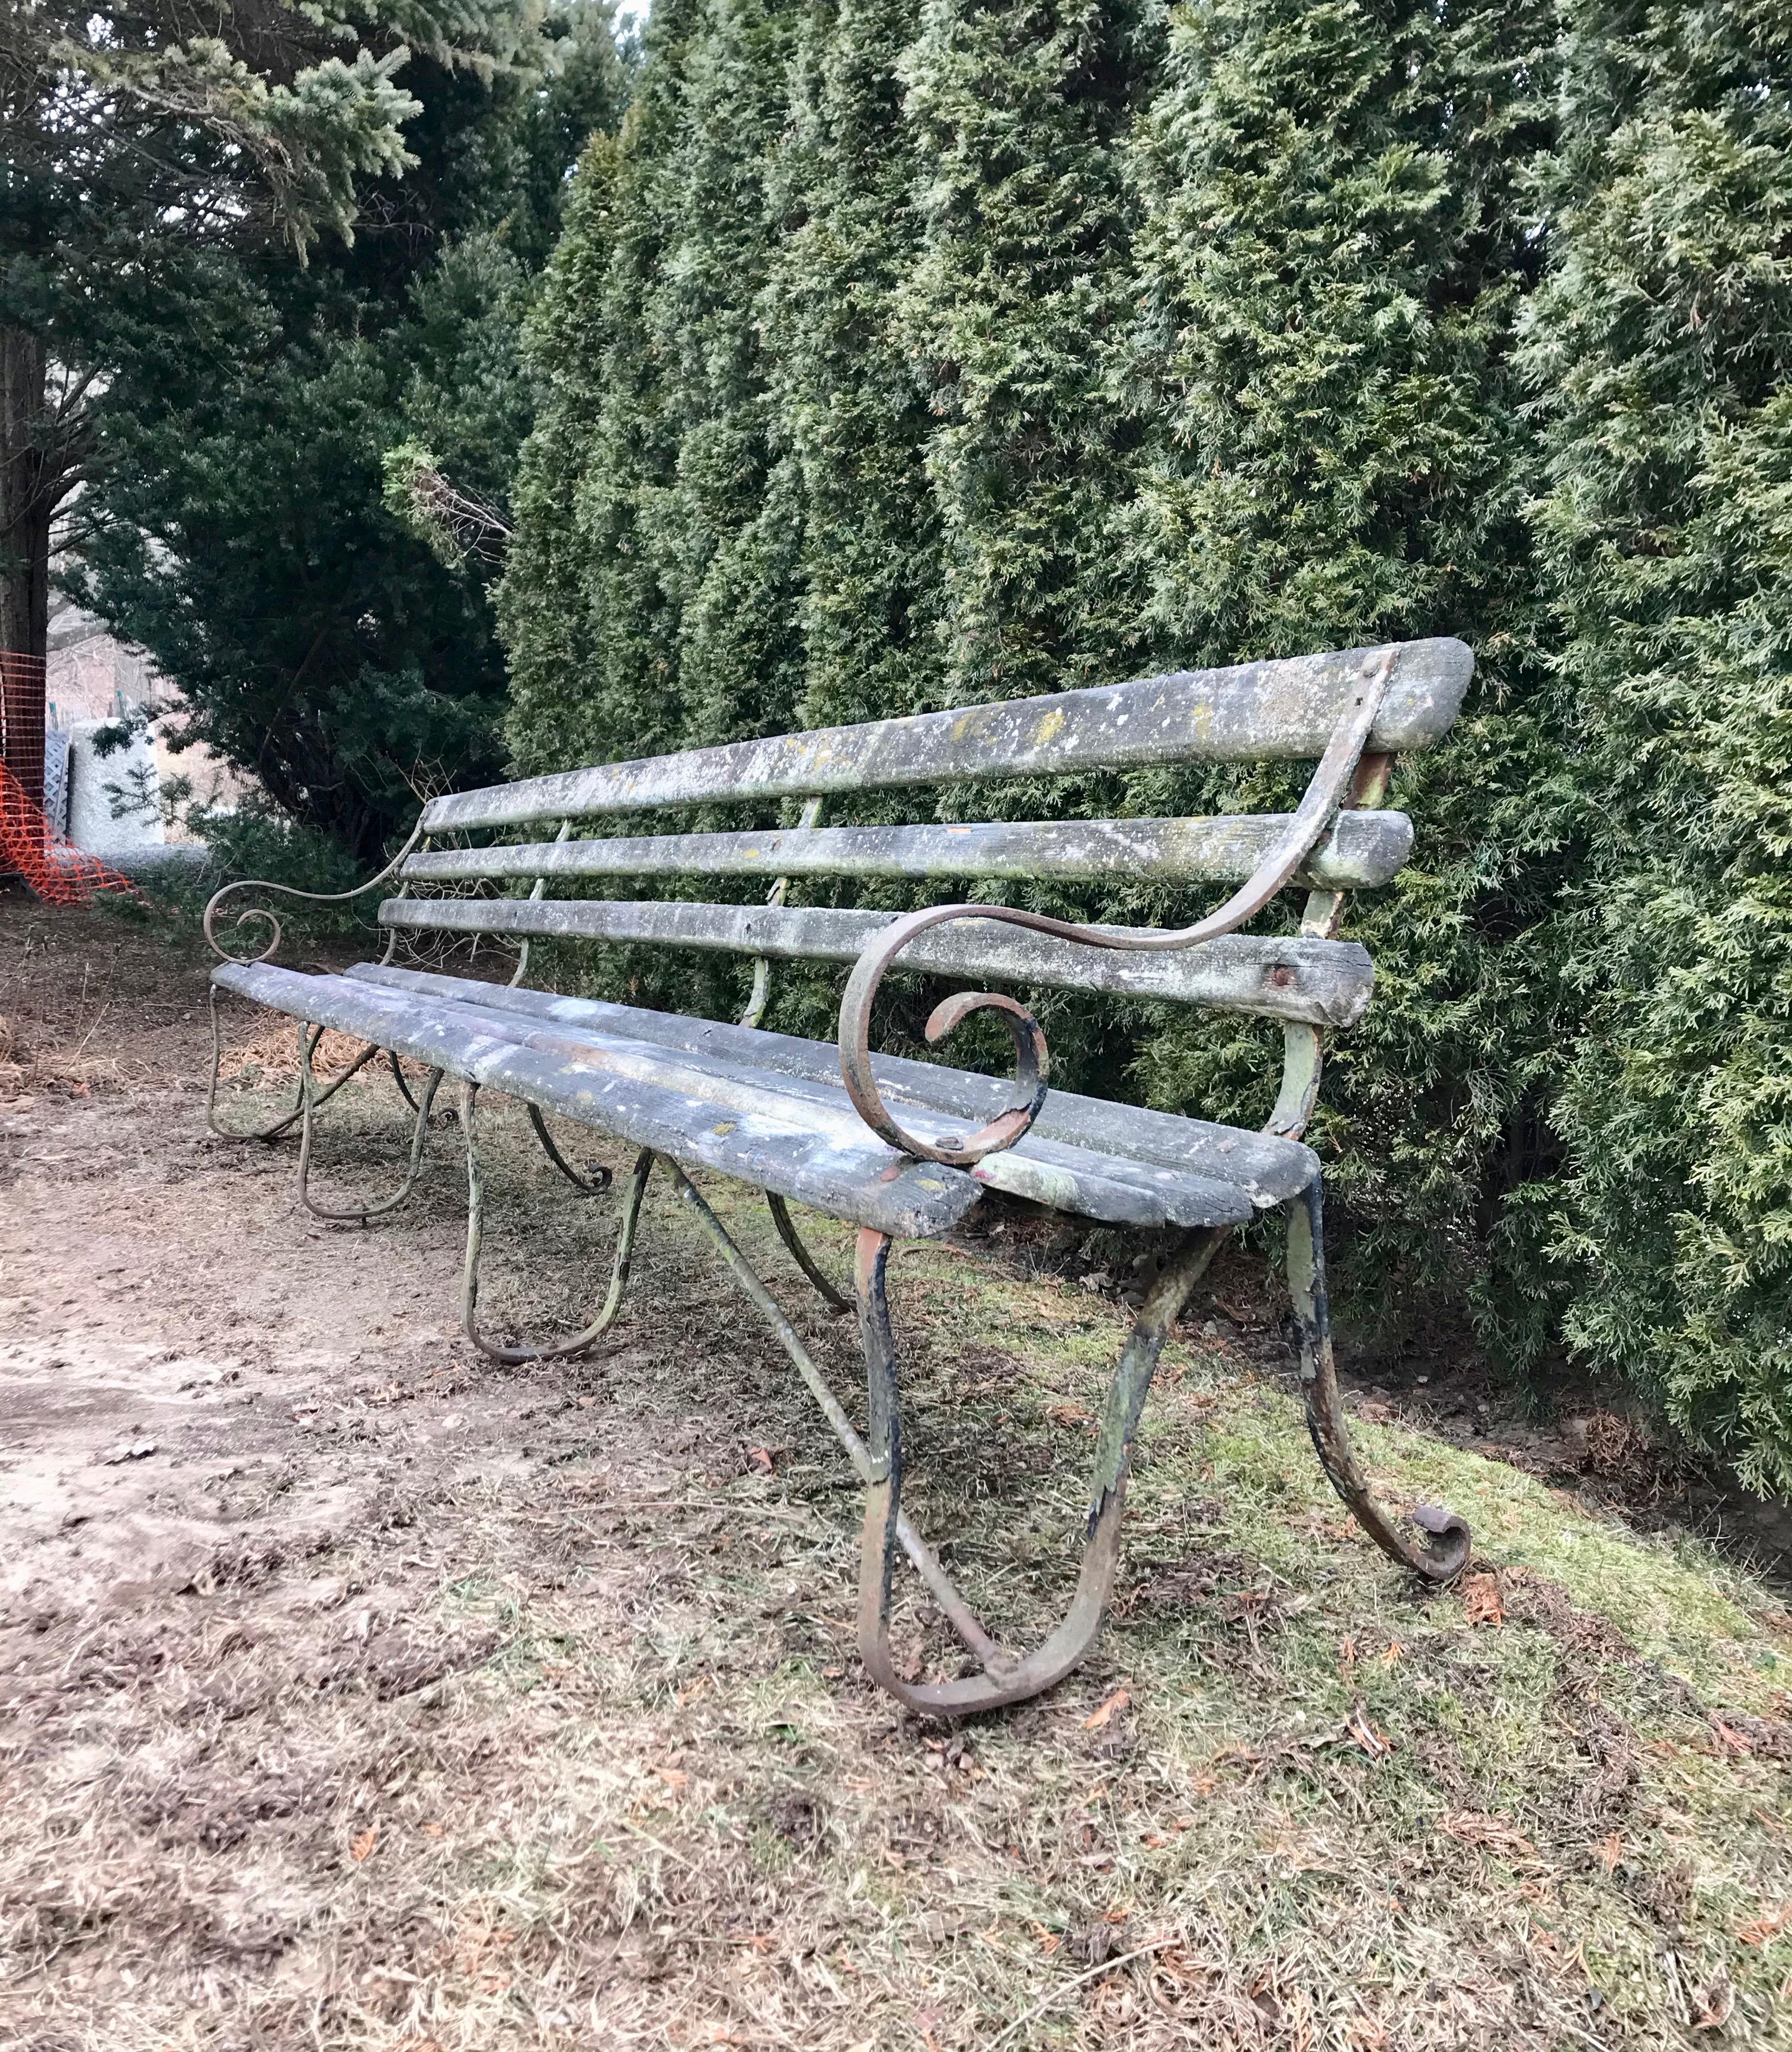 This amazing railway station bench originated from the Barcombe Mills train station in Lewes, East Sussex, which was opened in 1858 and closed in 1965. Made of oak and probably larch, the bench features its original wrought iron frame and most of